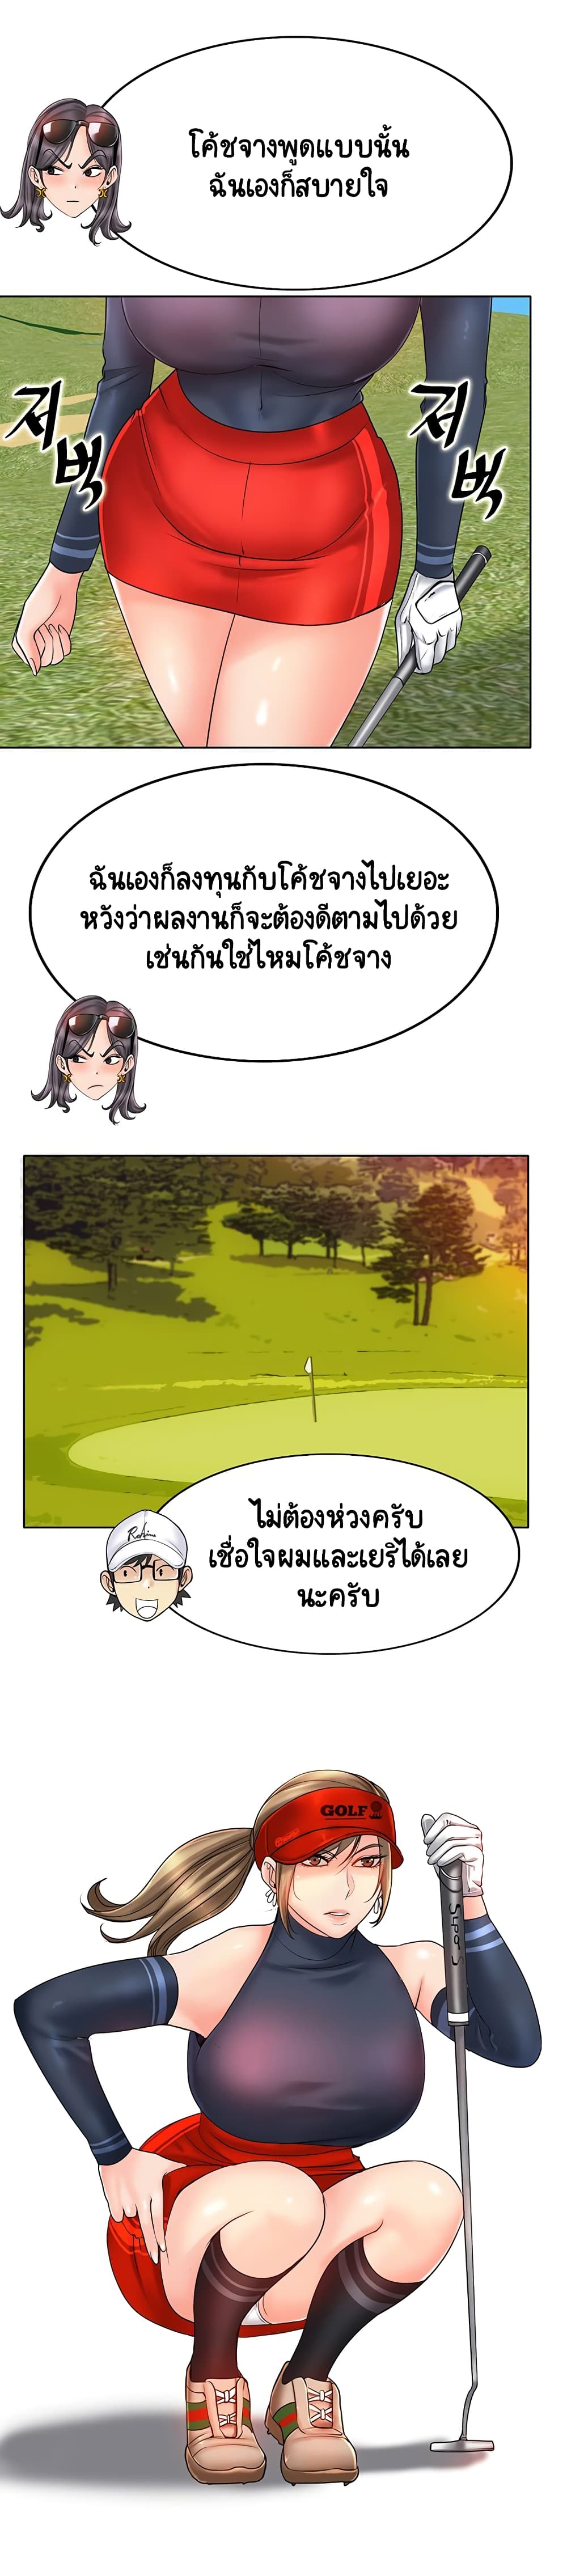 Hole In One21 (5)